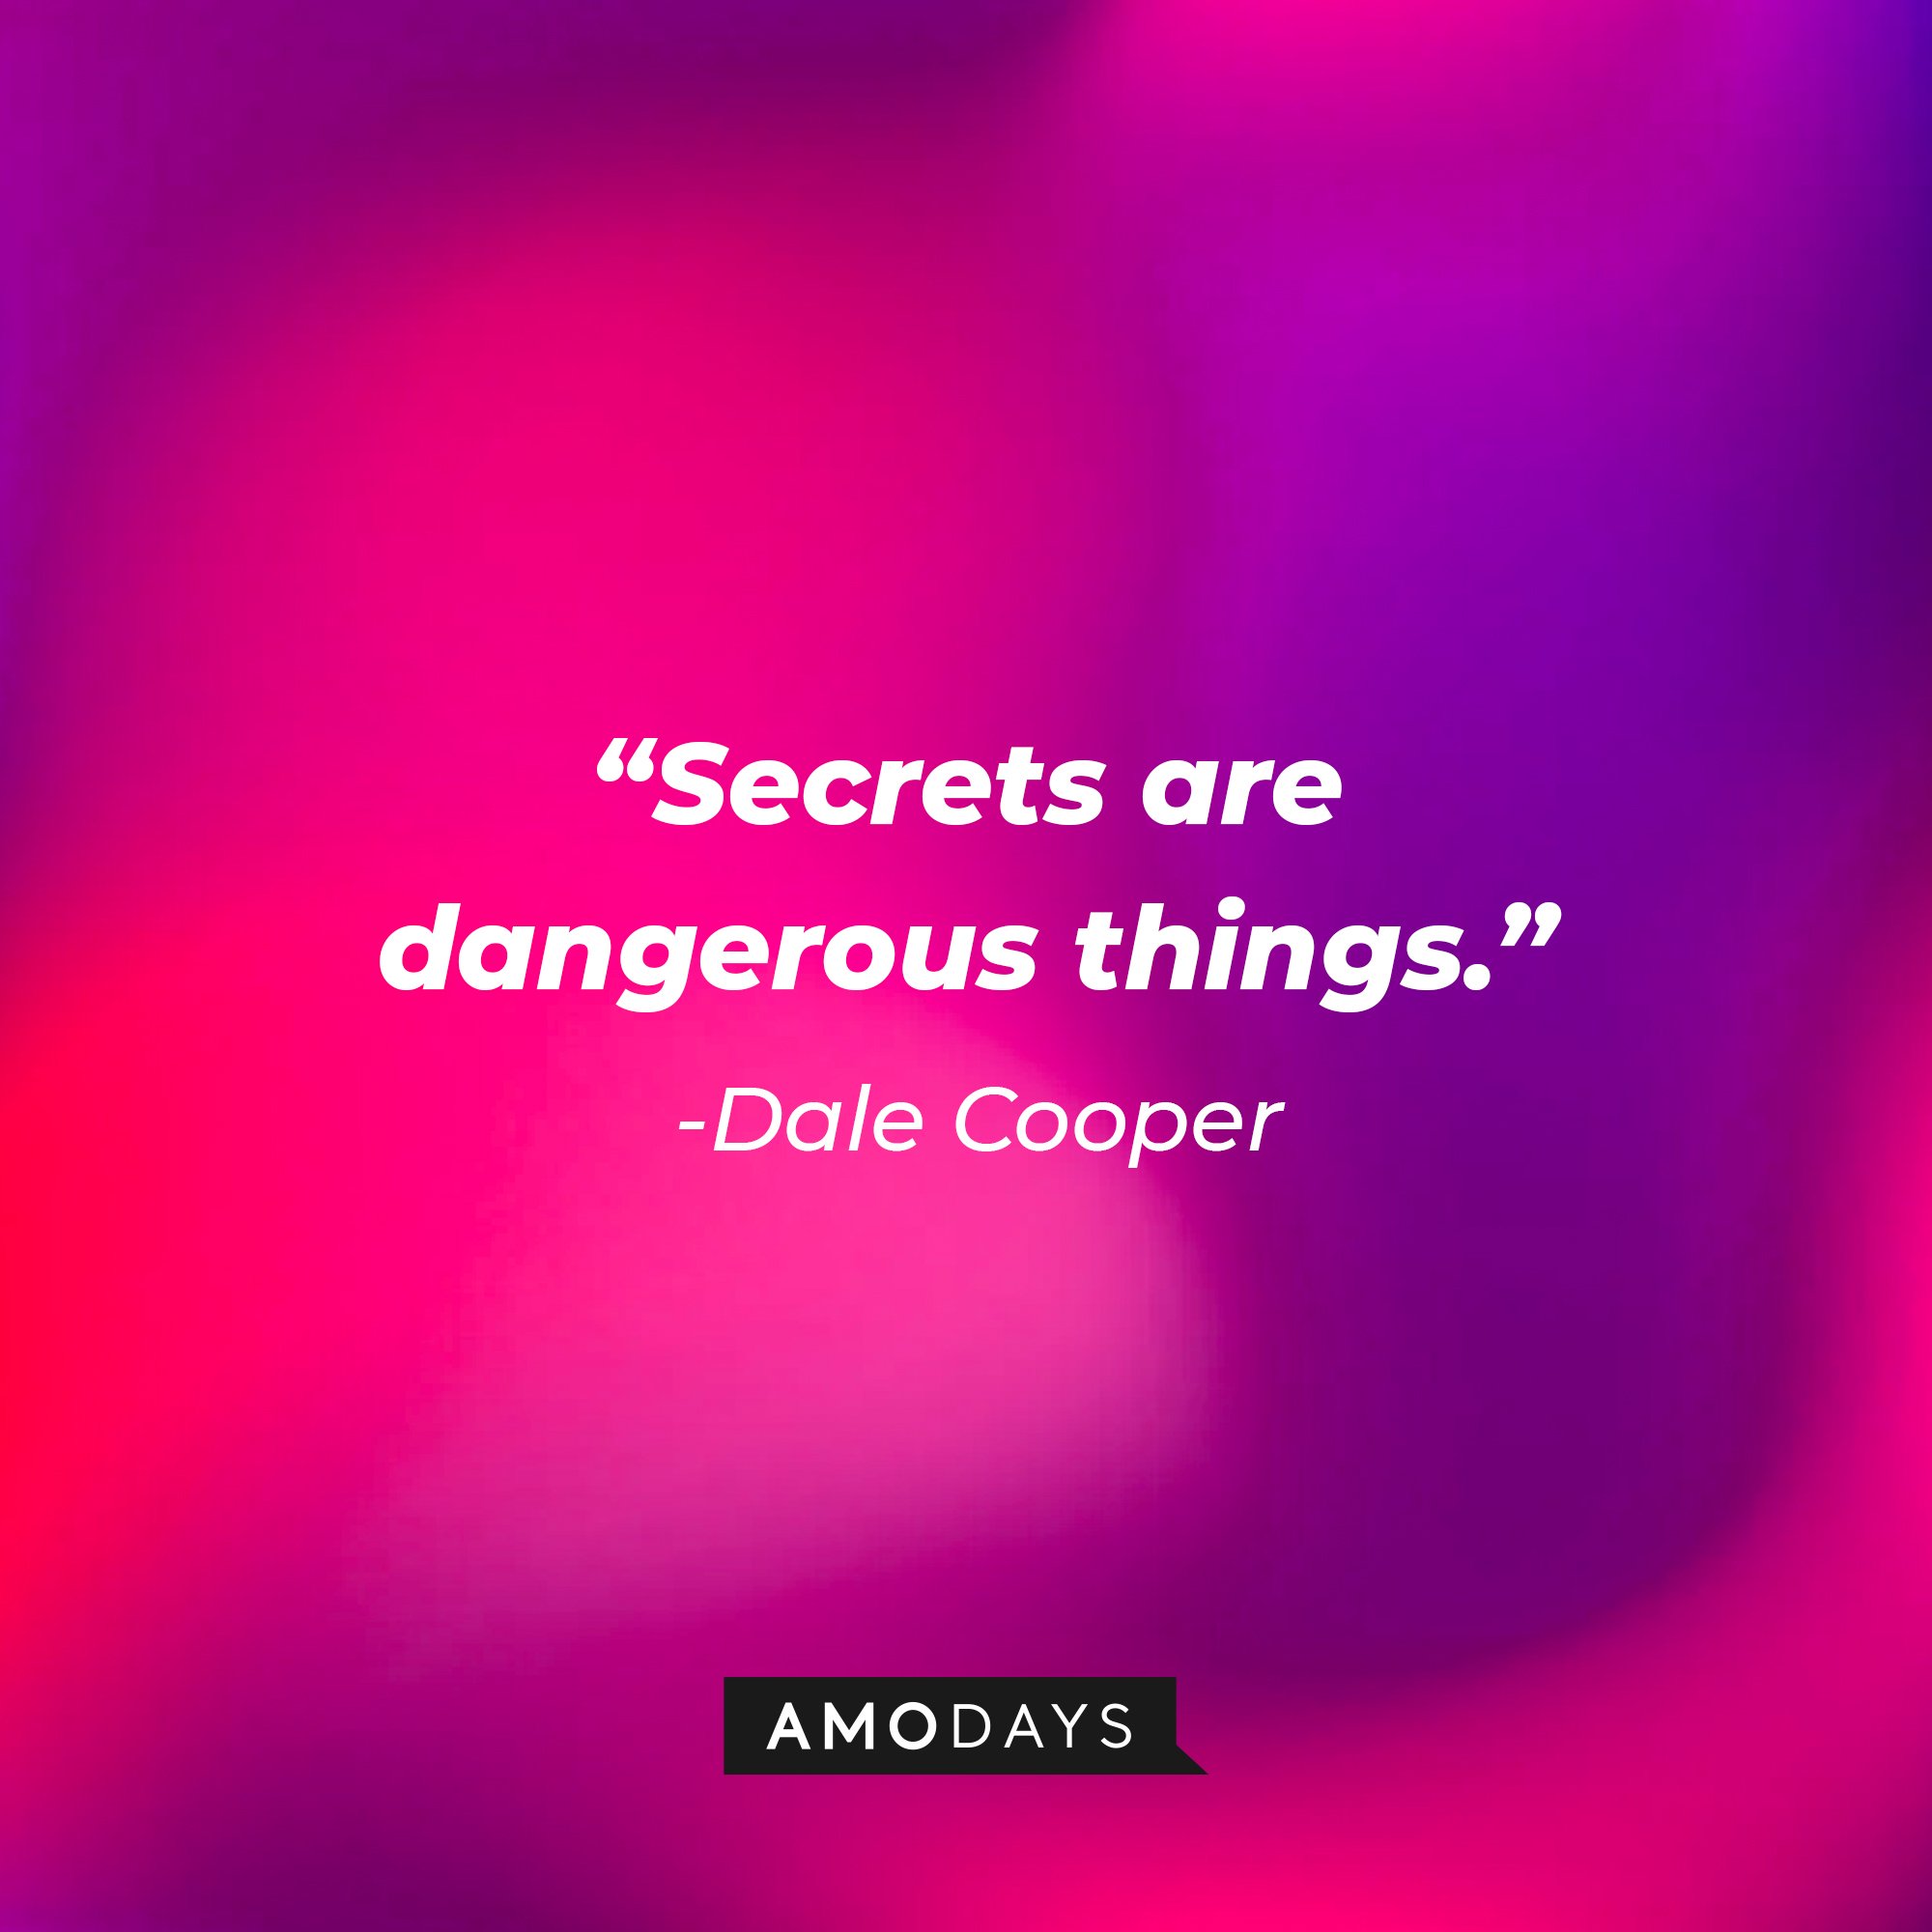 Dale Cooper’s quote: "Secrets are dangerous things." | Image: AmoDays